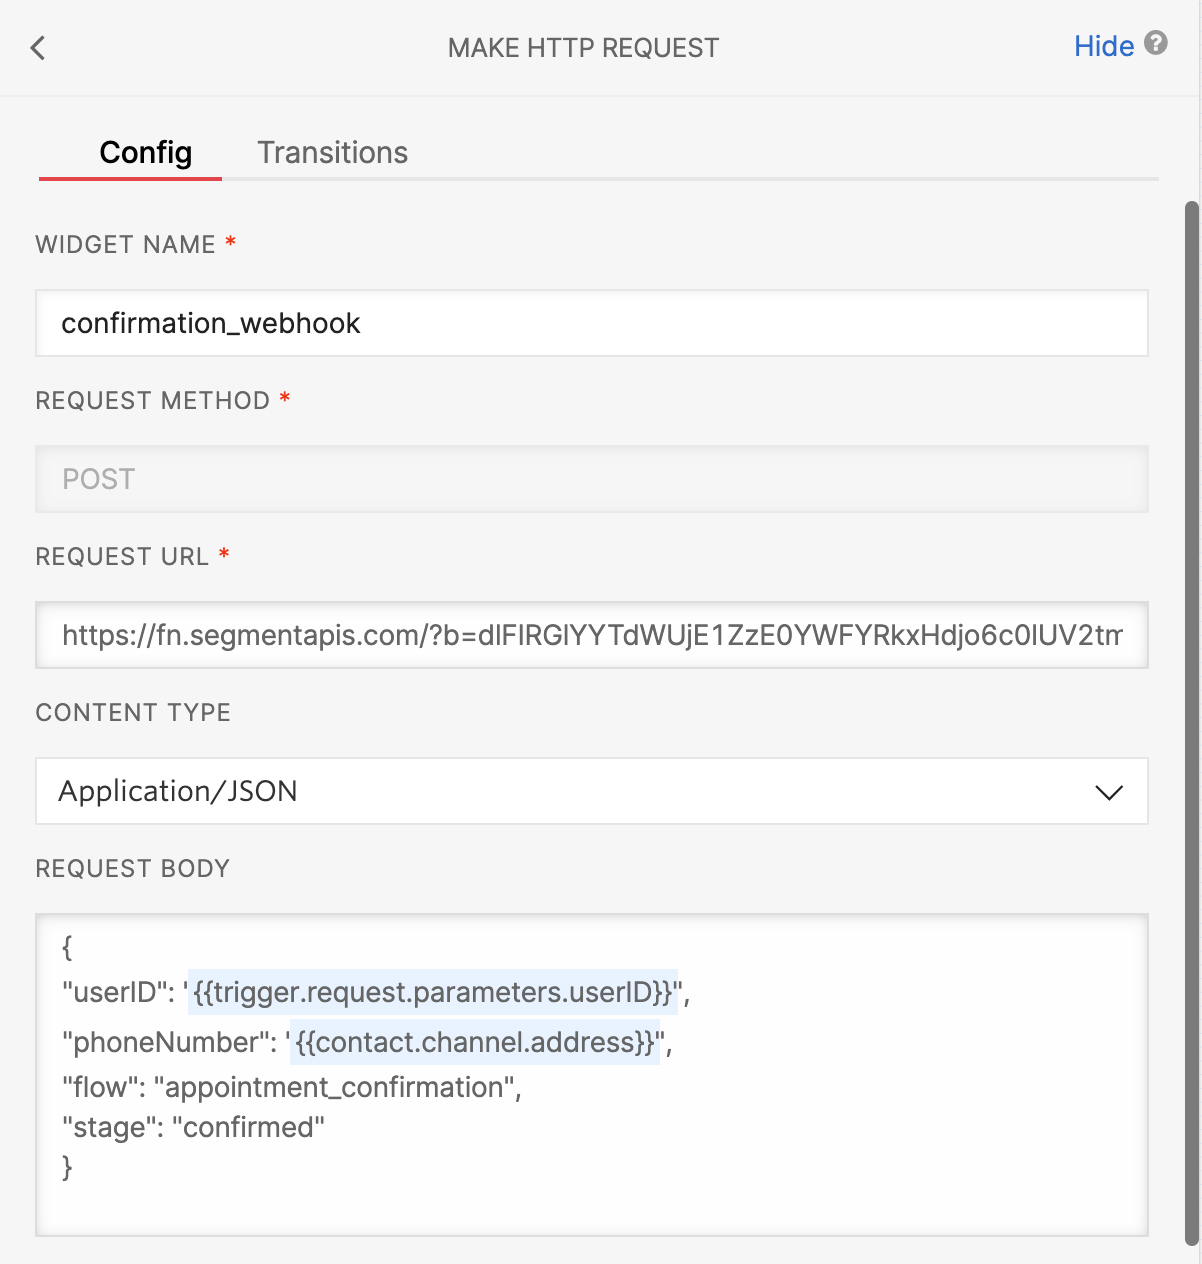 Updating the Make HTTP Request widget with production URL.